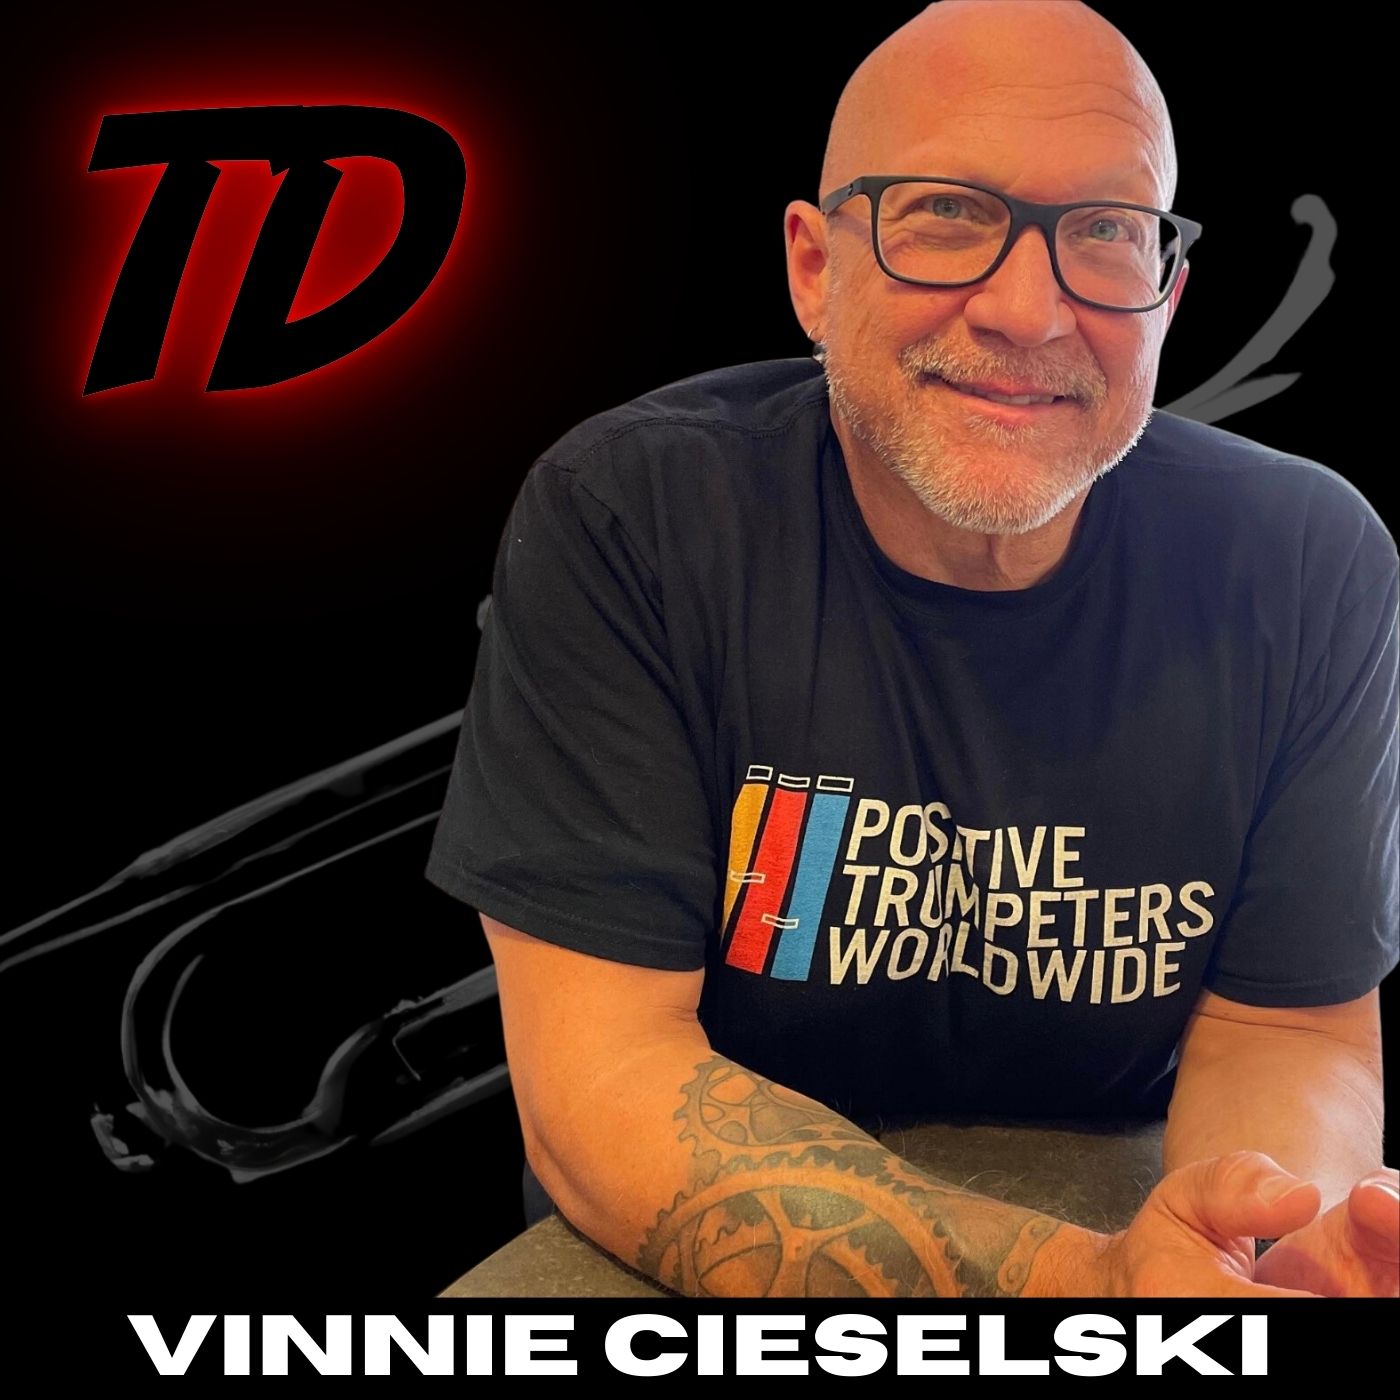 Playing With Feeling While You Can't Feel Anything, Wasted Emotions, and Trumpet as a Higher Calling with Vinnie Ciesielski! [Part 2 of 2]